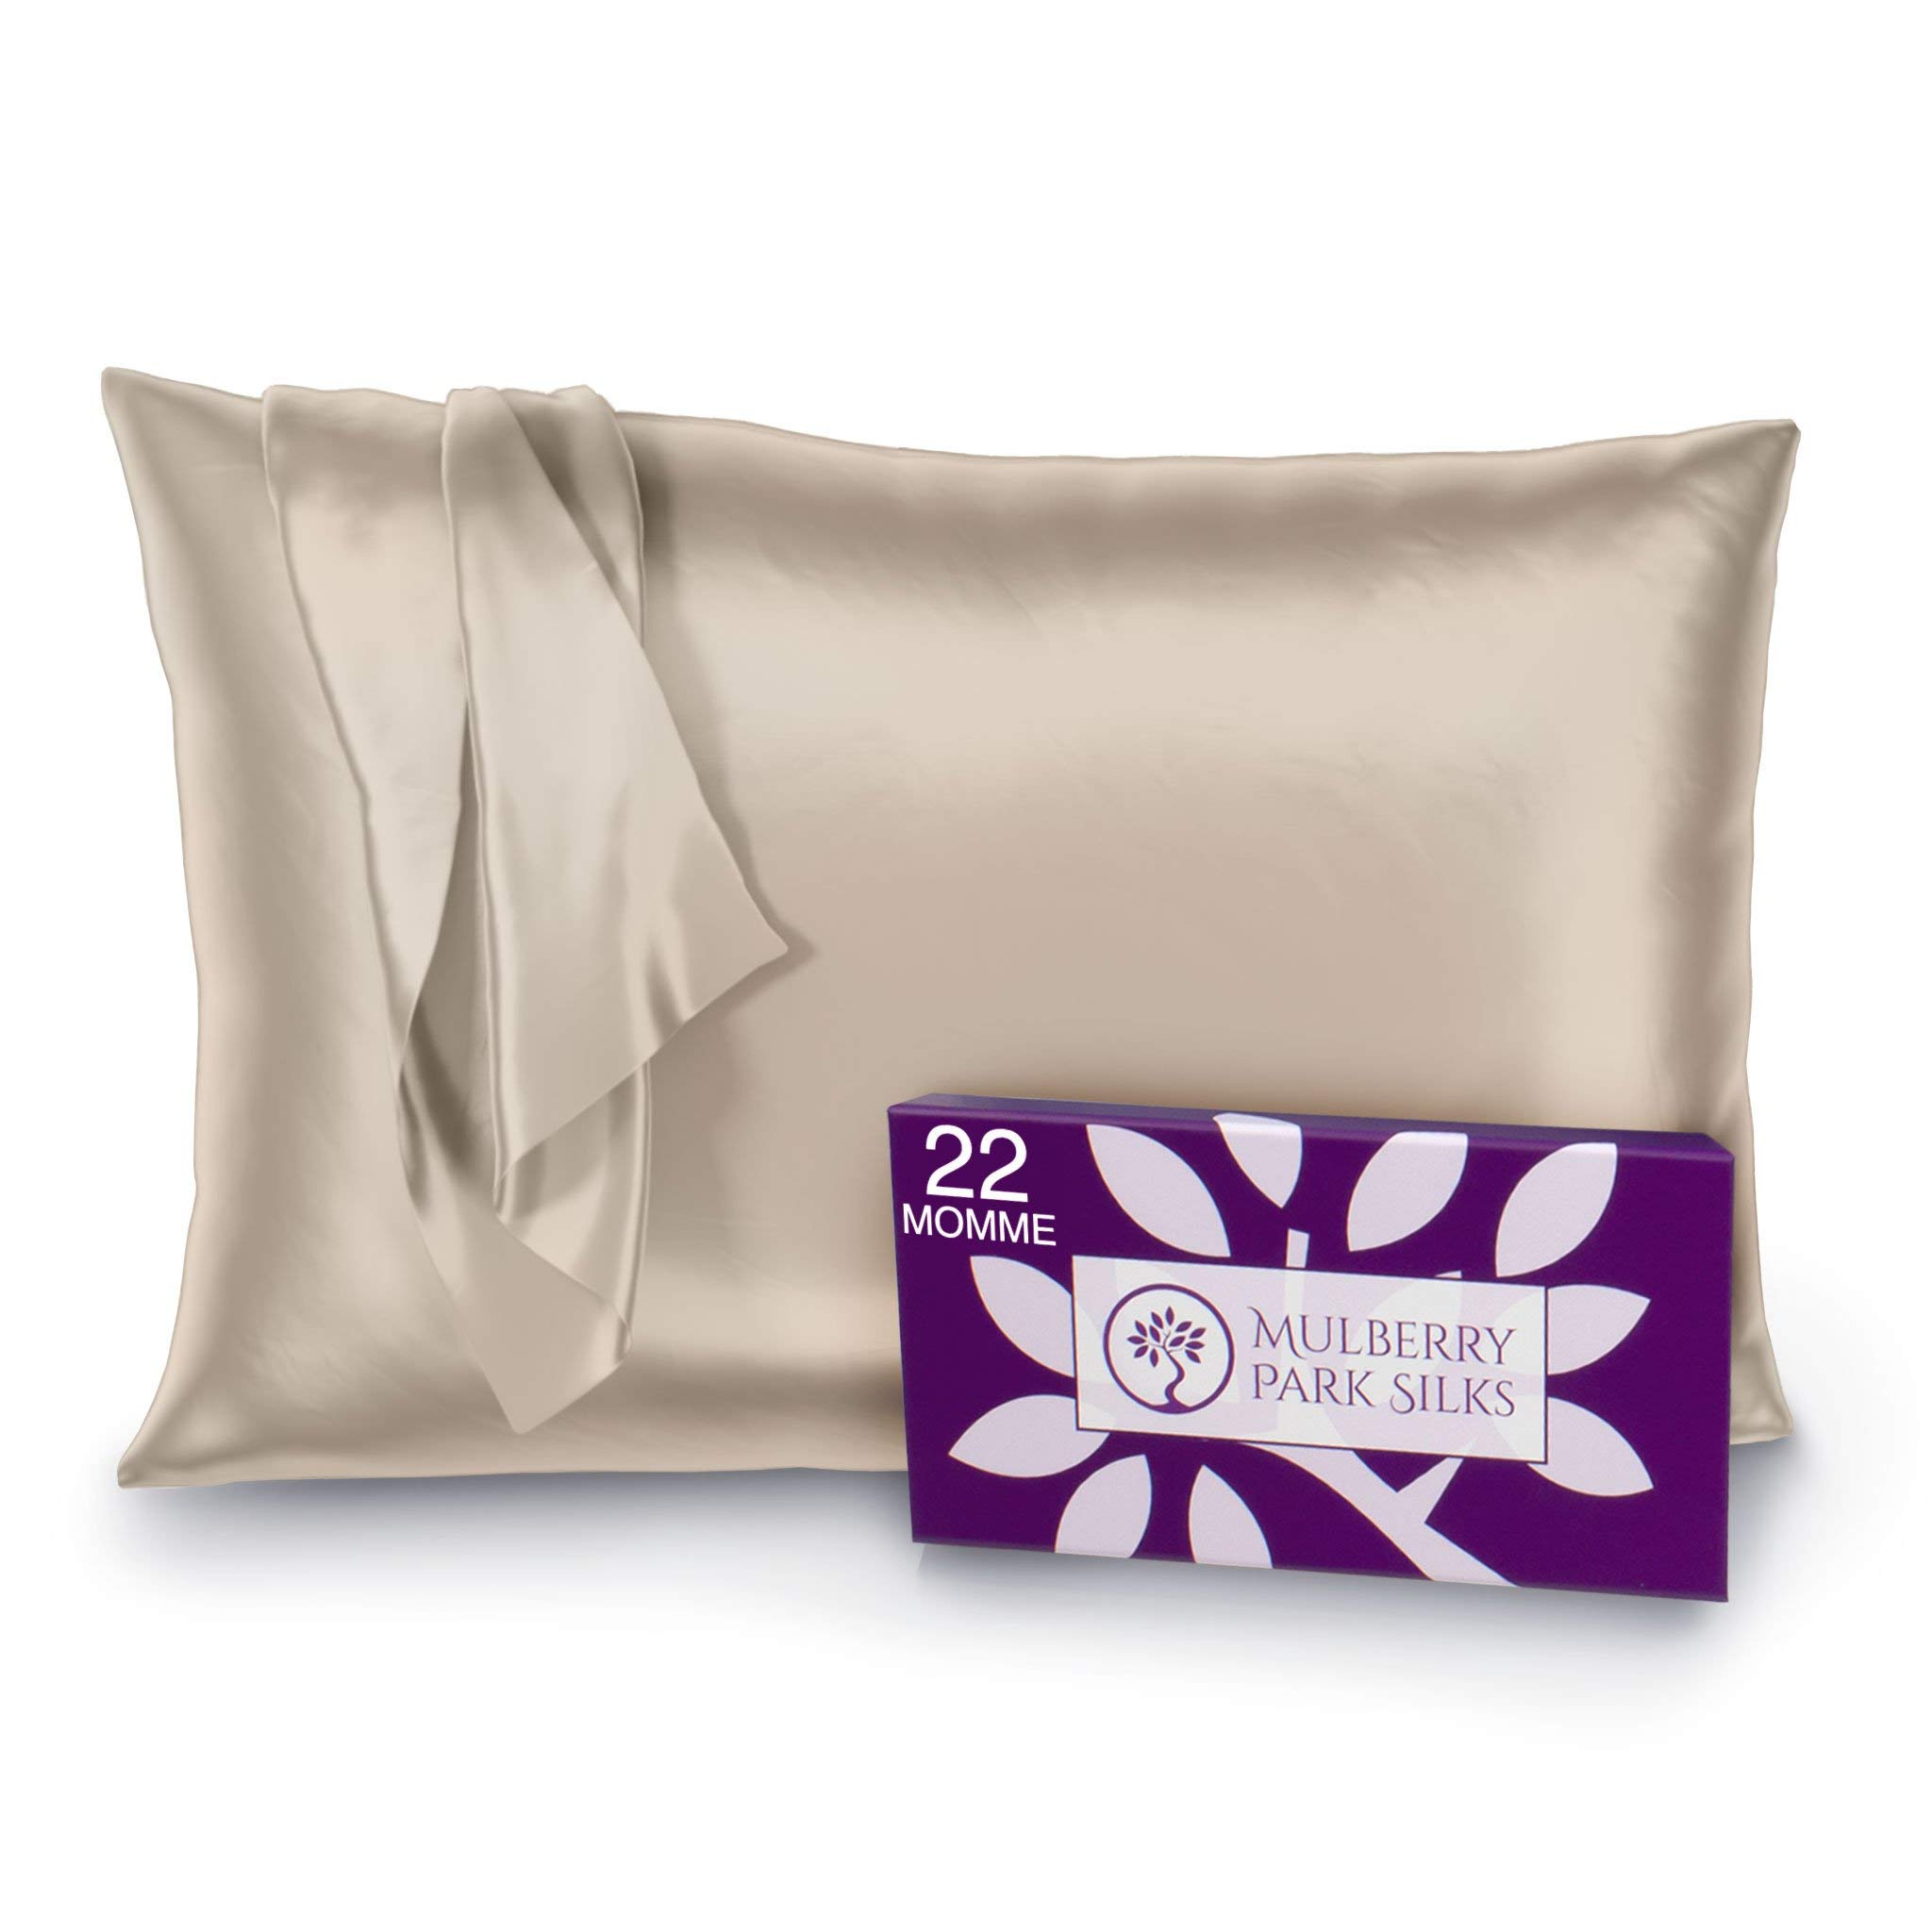 Mulberry Park - 22 Momme Silk Pillowcase - Prevents Bed Head, Tames Frizz, Moisturizes Skin, Minimizes Sleep Lines and Helps with Wrinkles - Highes...